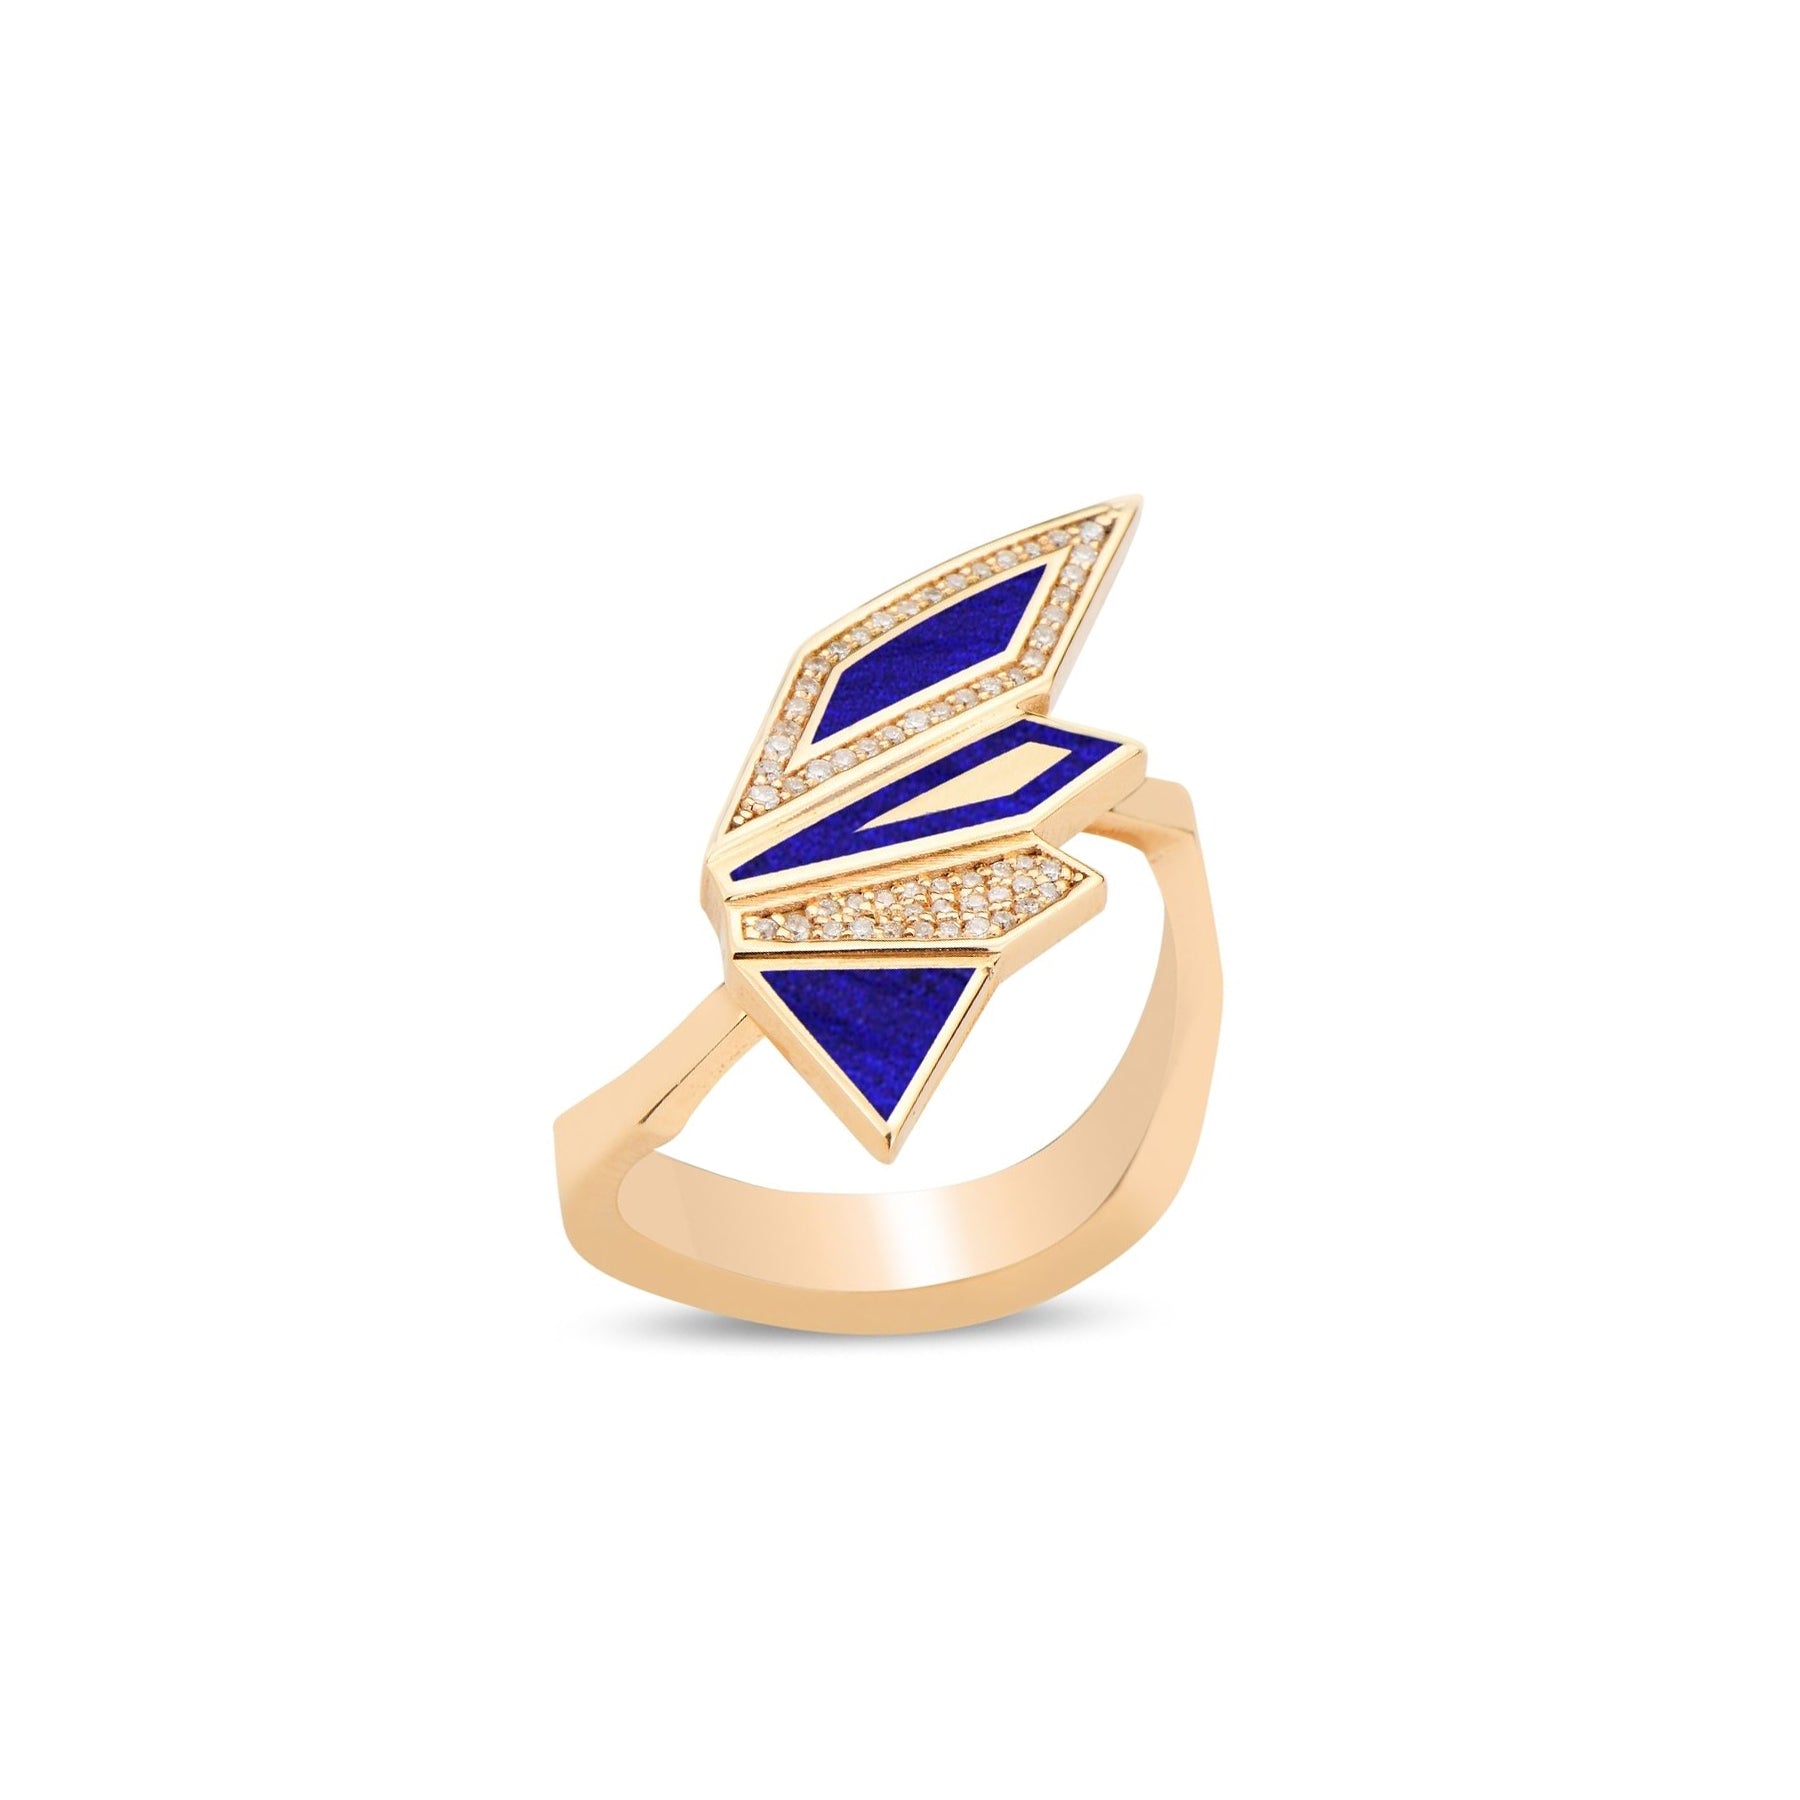 Alis Ring with Parlament Blue Enamel